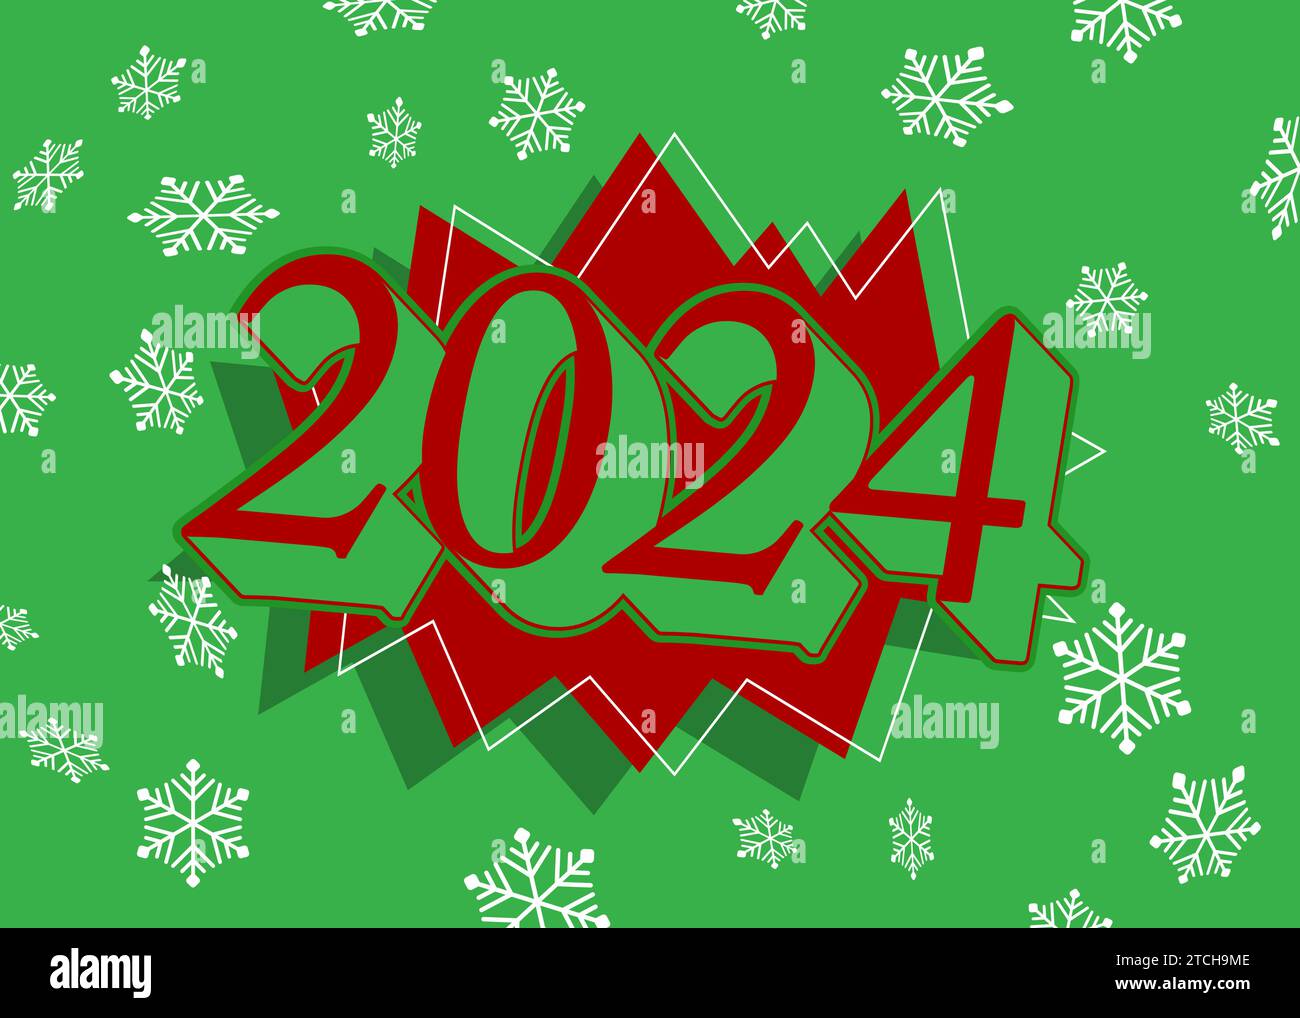 Snowflake background with 2024 number. Holiday event poster, Winter, Snow, Christmas banner. Stock Vector